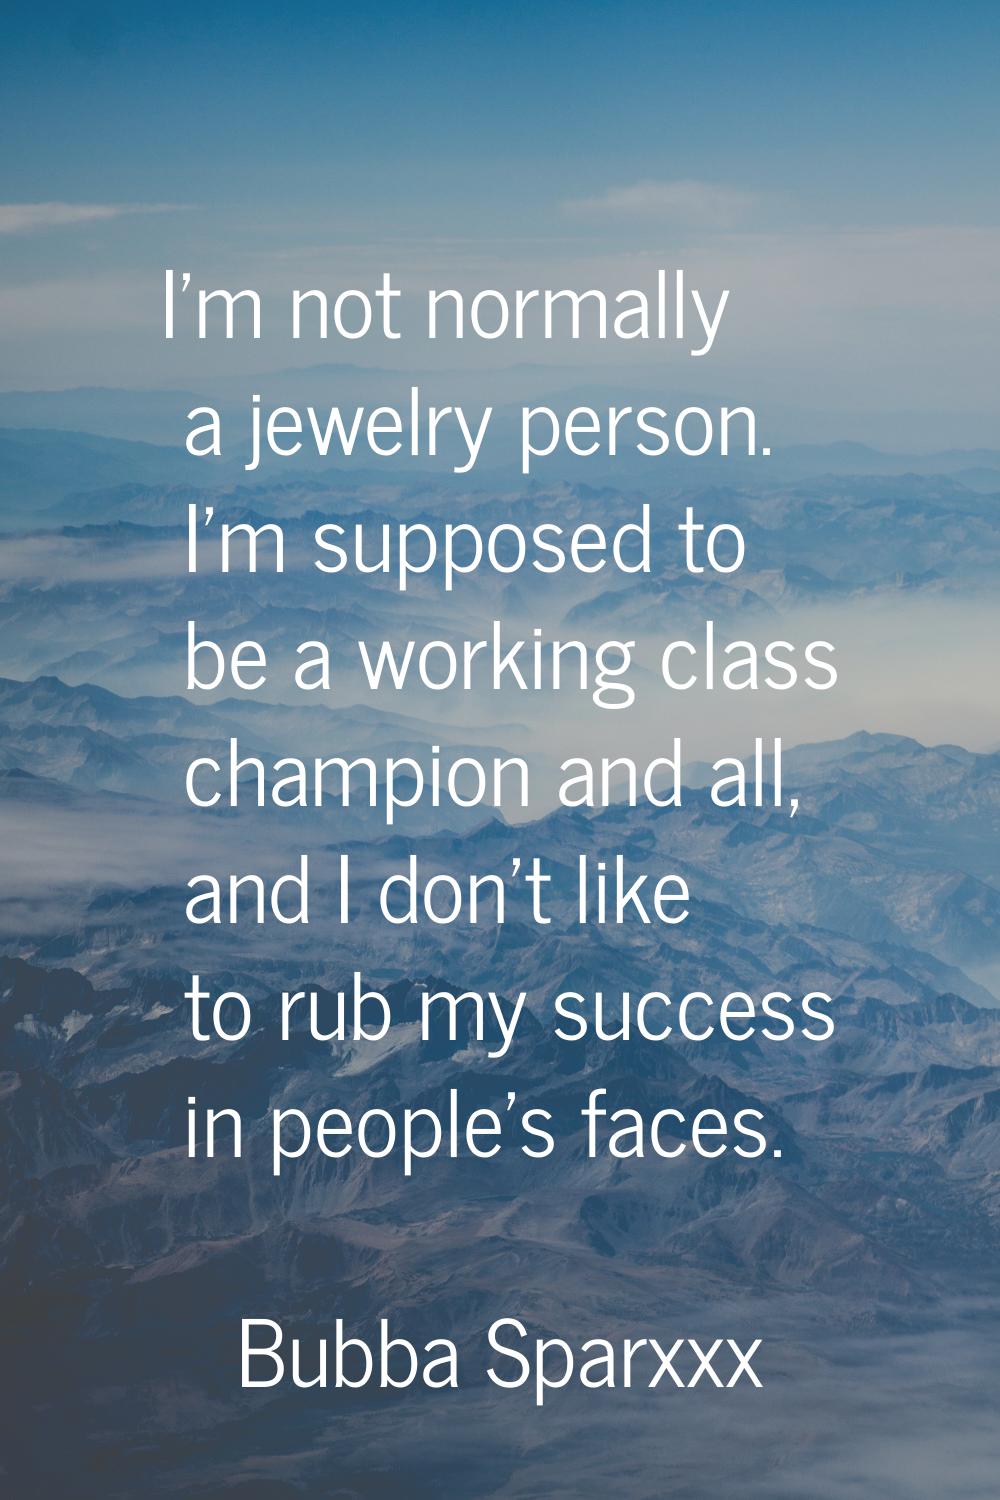 I'm not normally a jewelry person. I'm supposed to be a working class champion and all, and I don't